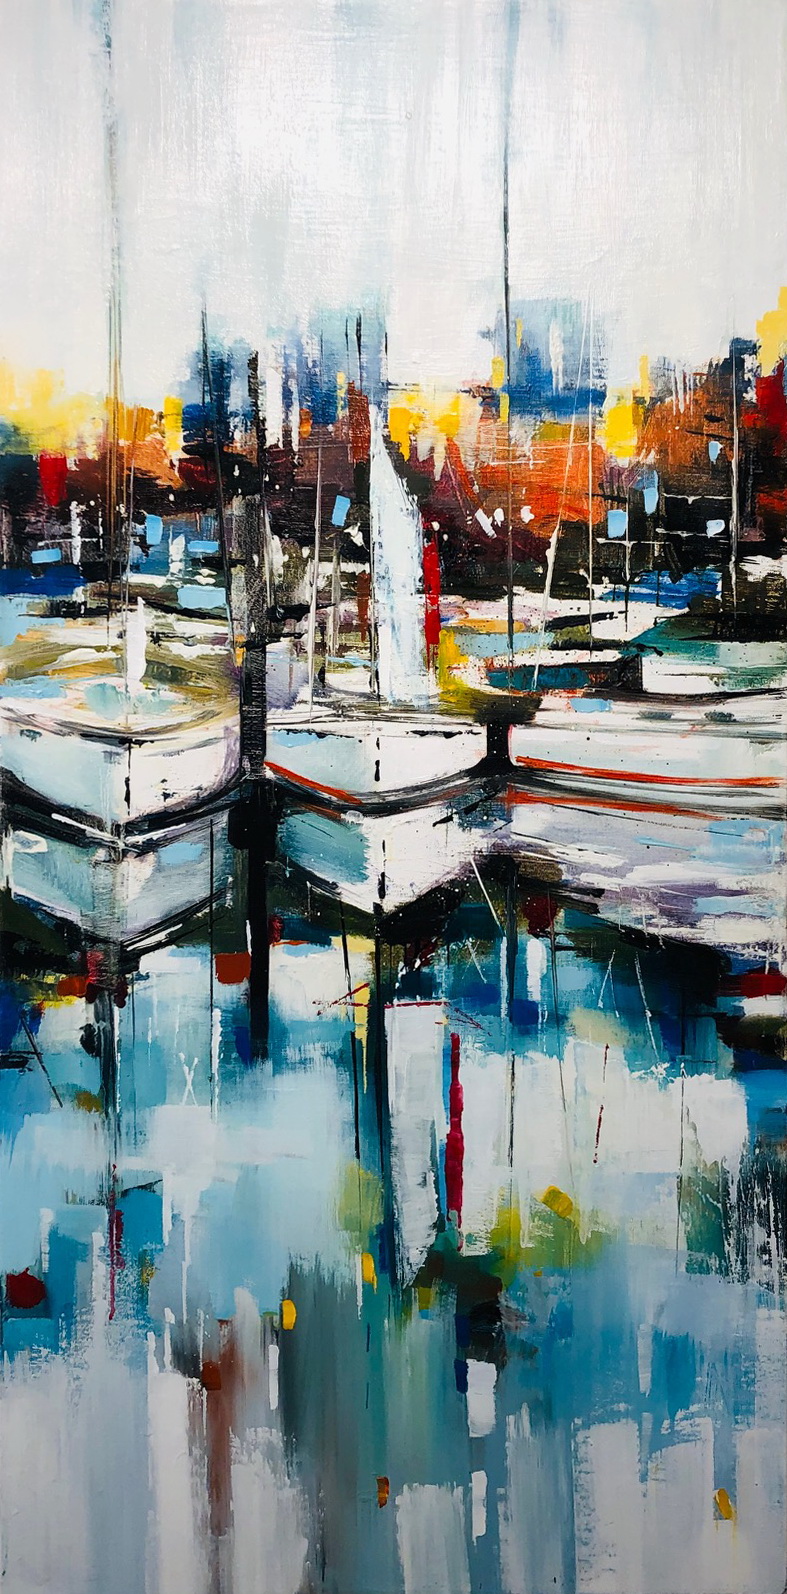 At the Harbour II by Yared Nigussu at The Avenue Gallery, a contemporary fine art gallery in Victoria, BC, Canada.